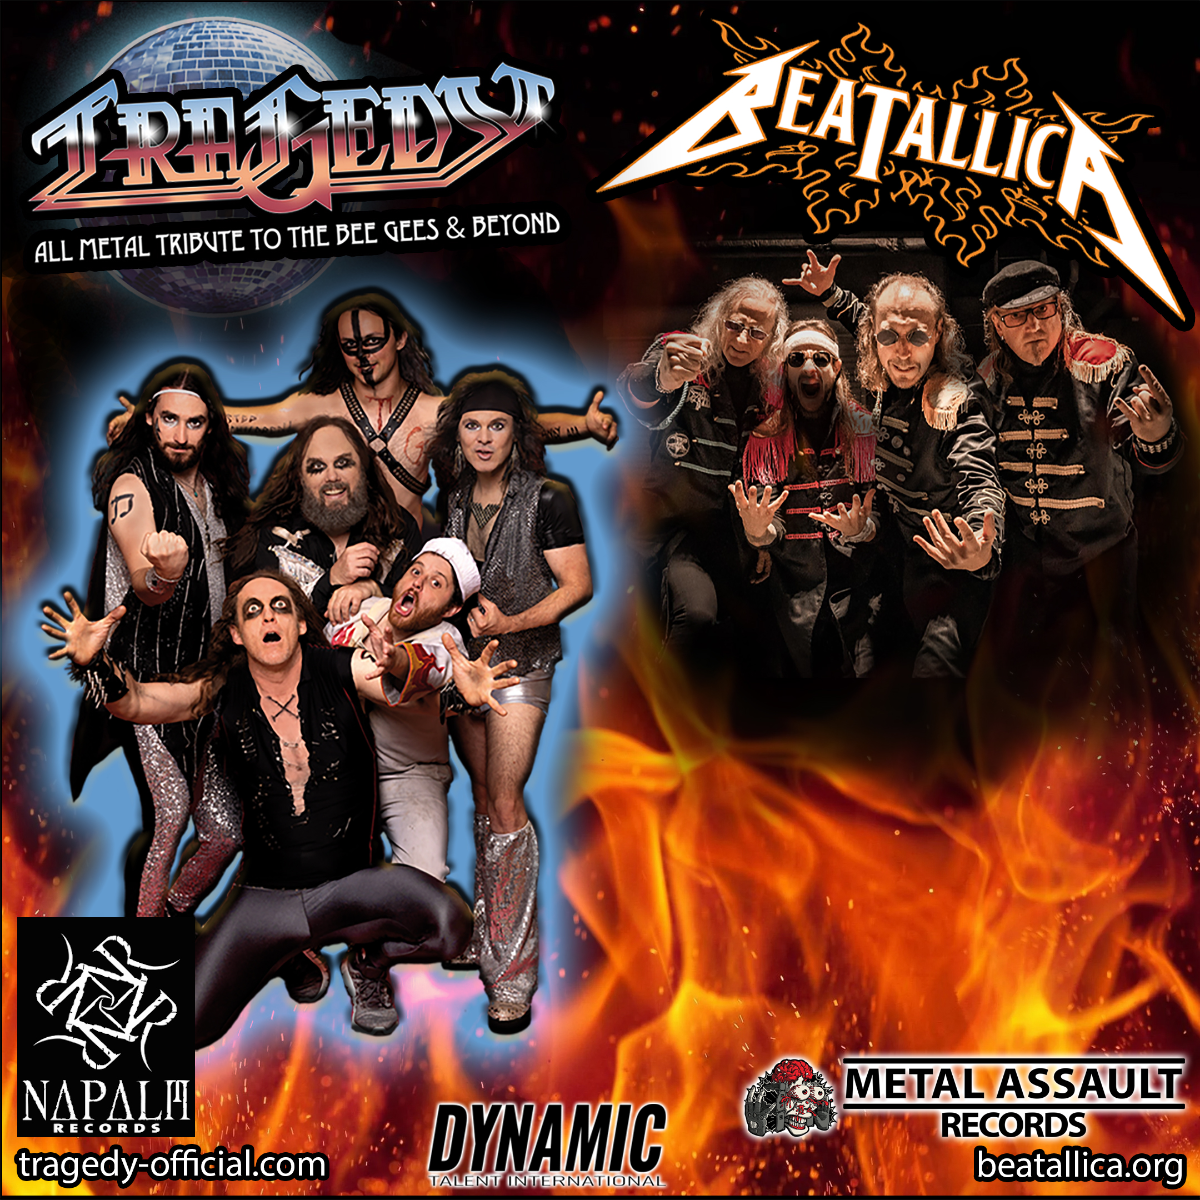 Tragedy: All Metal Tribute to the Bee Gees & Beyond + Beatallica